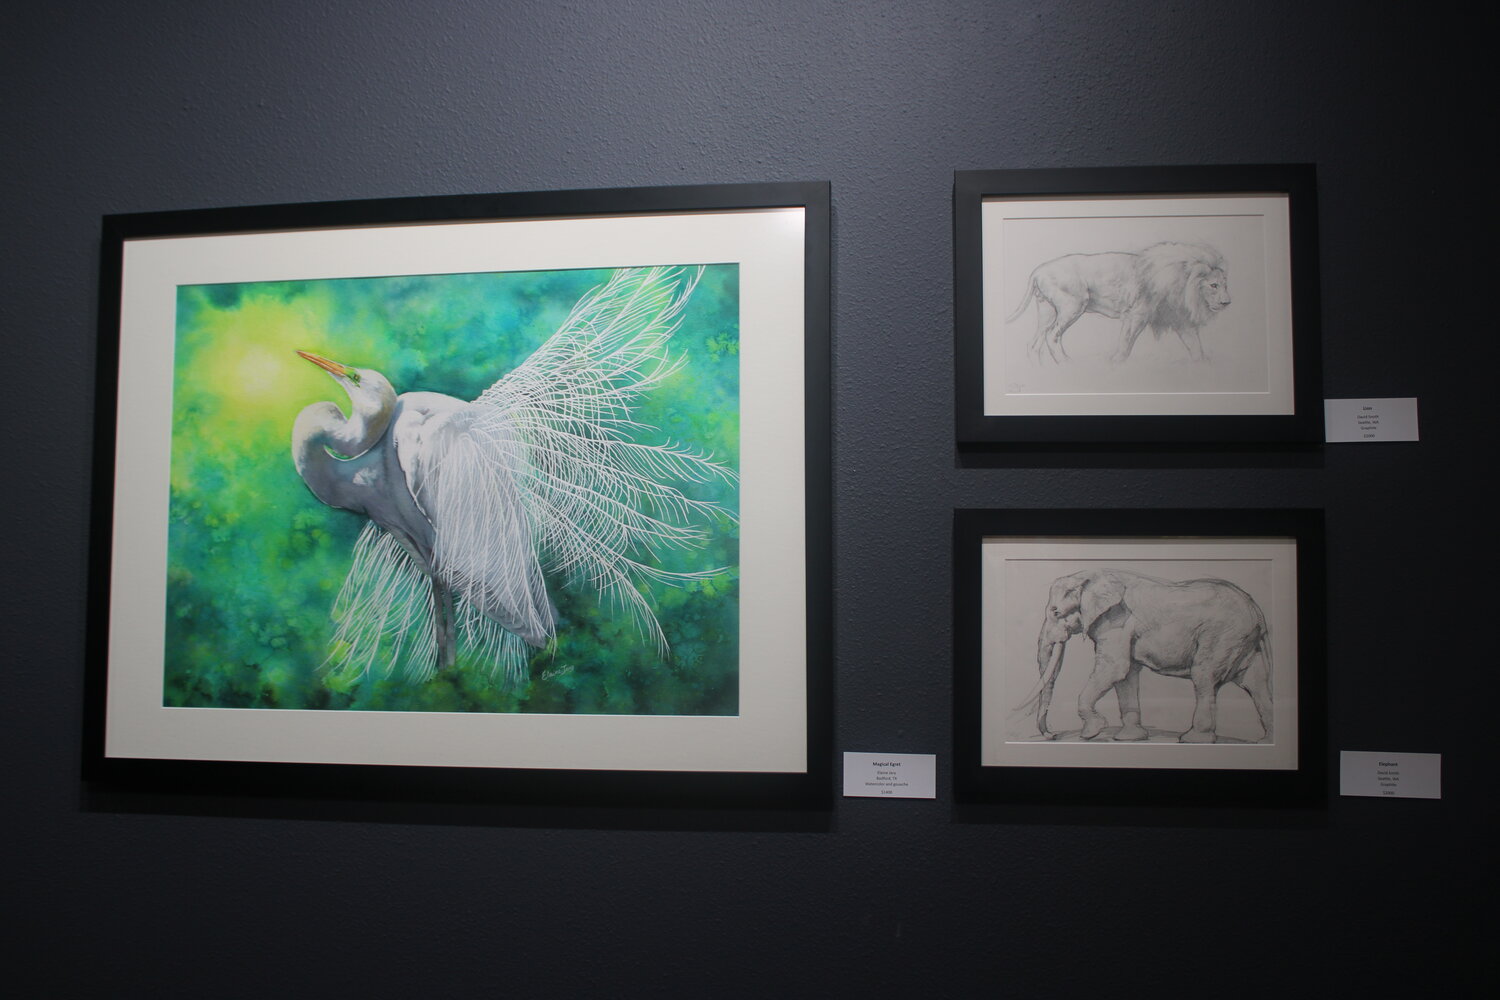 Depictions of animals are prominent in this year's LGAA Juried Fall Art Show, with artists from nine different states selected to display their finest art, like Elaine Jary from Bedford, and David Smith from Seattle, Washington.